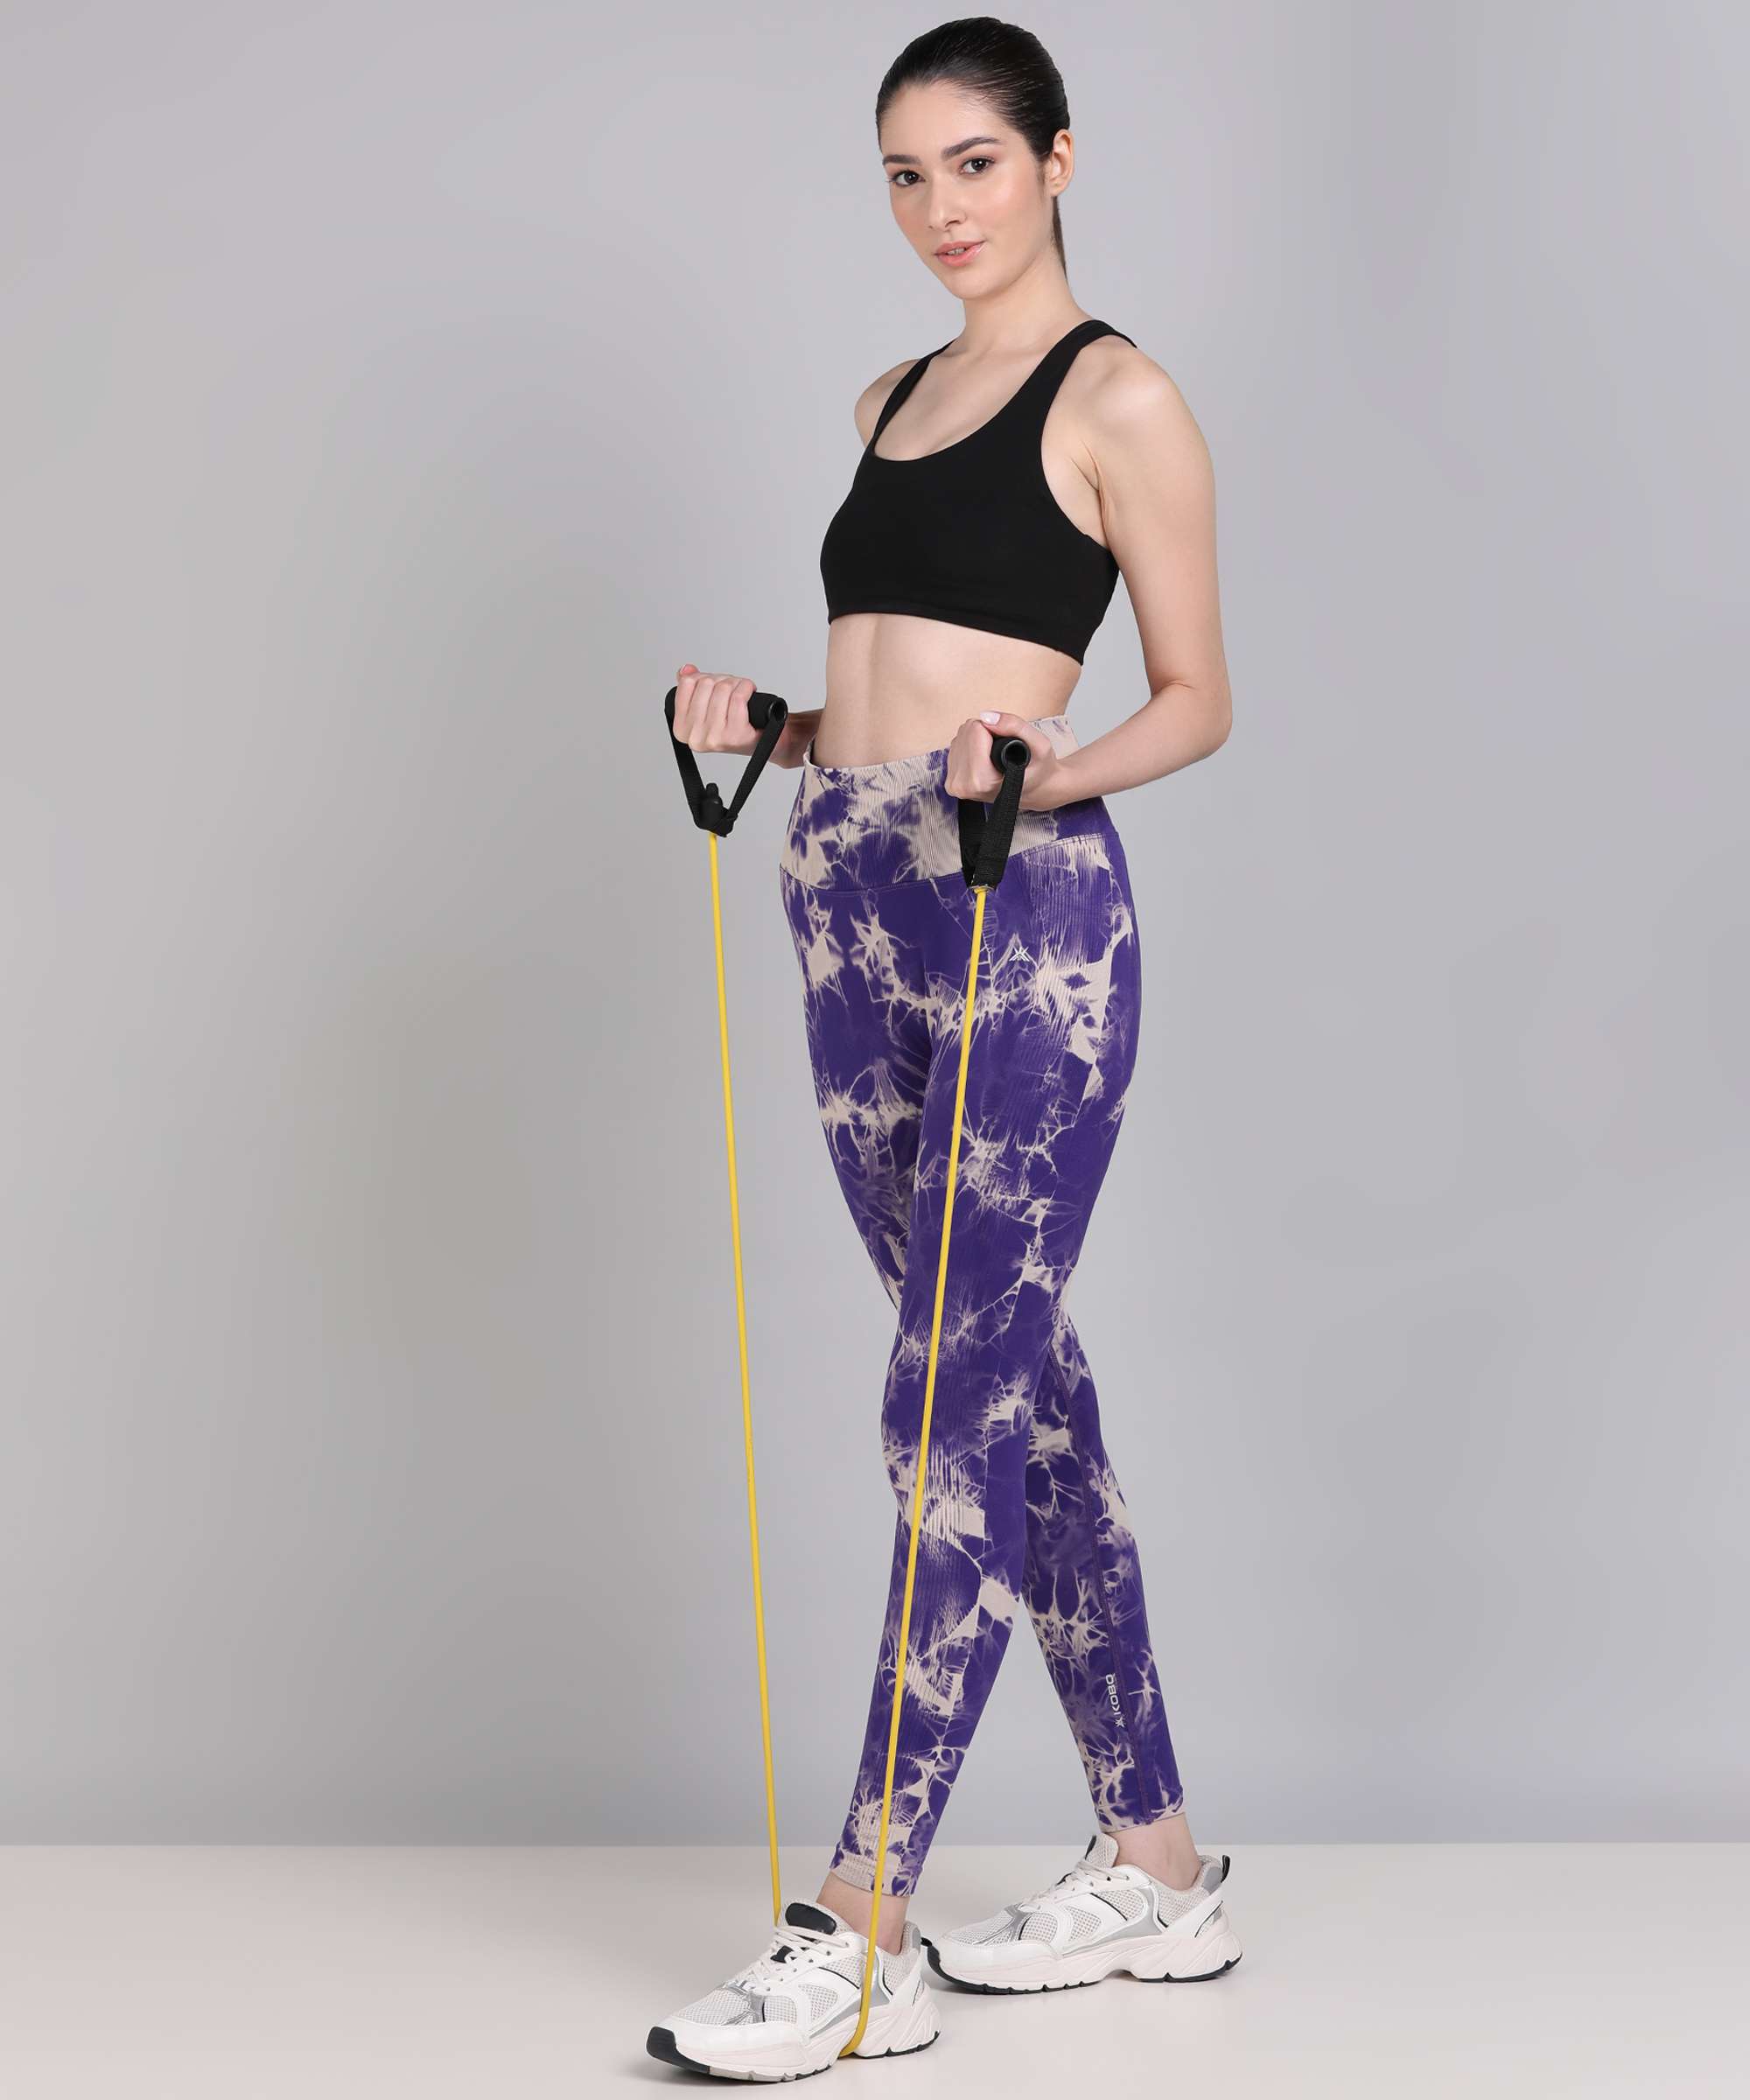 High-Waisted Squat-Proof Seamless Leggings – COMPASS FIT